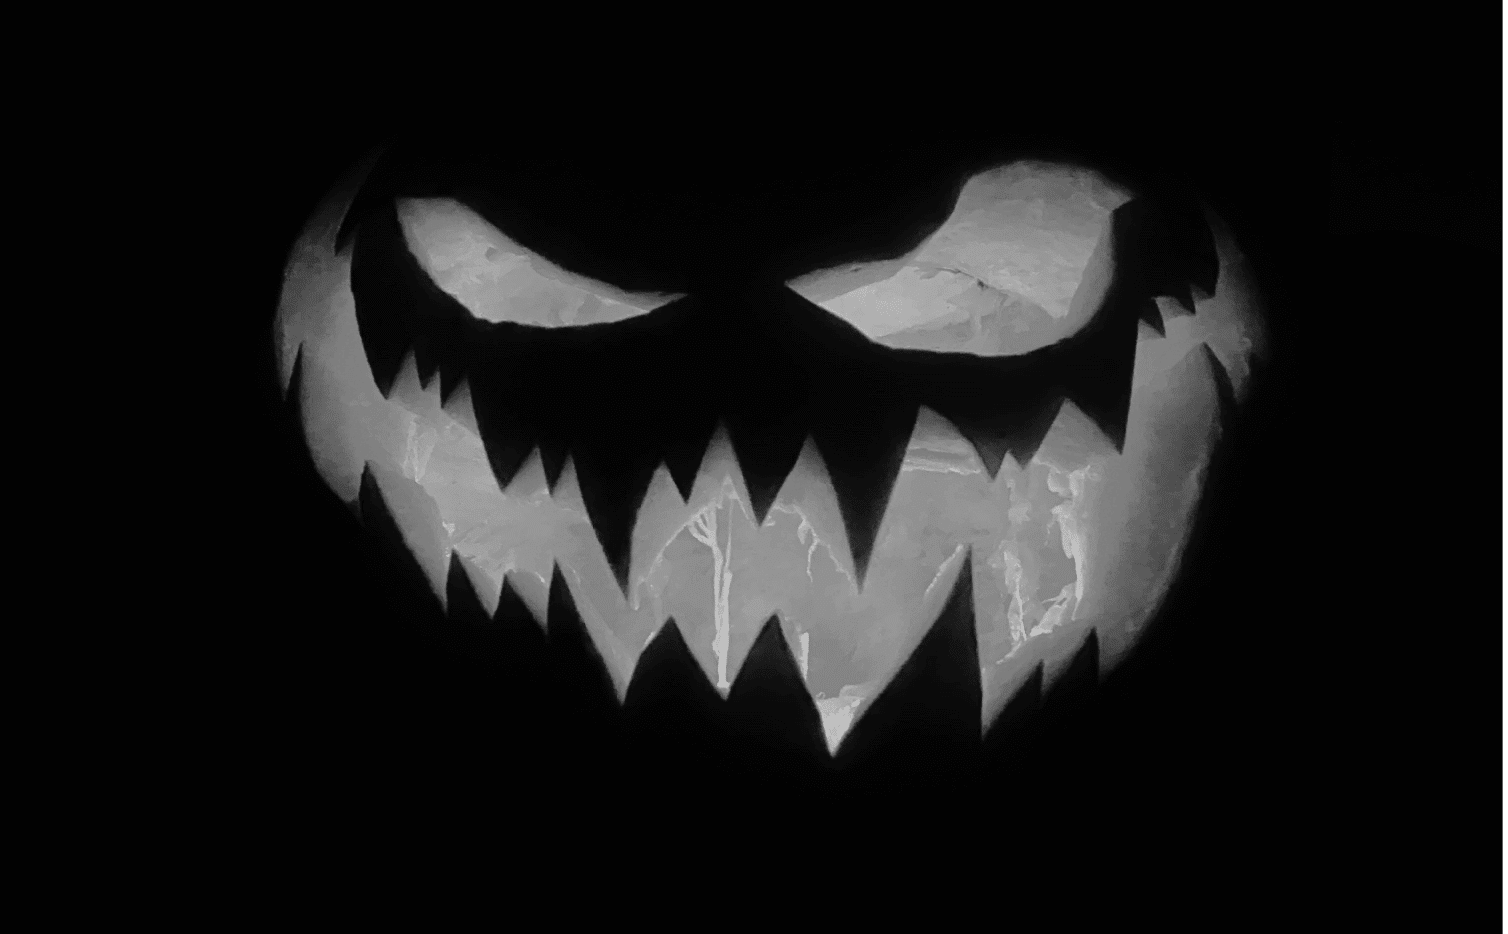 This image of a carved pumpkin illustrates this post's scary story about domains for Halloween.